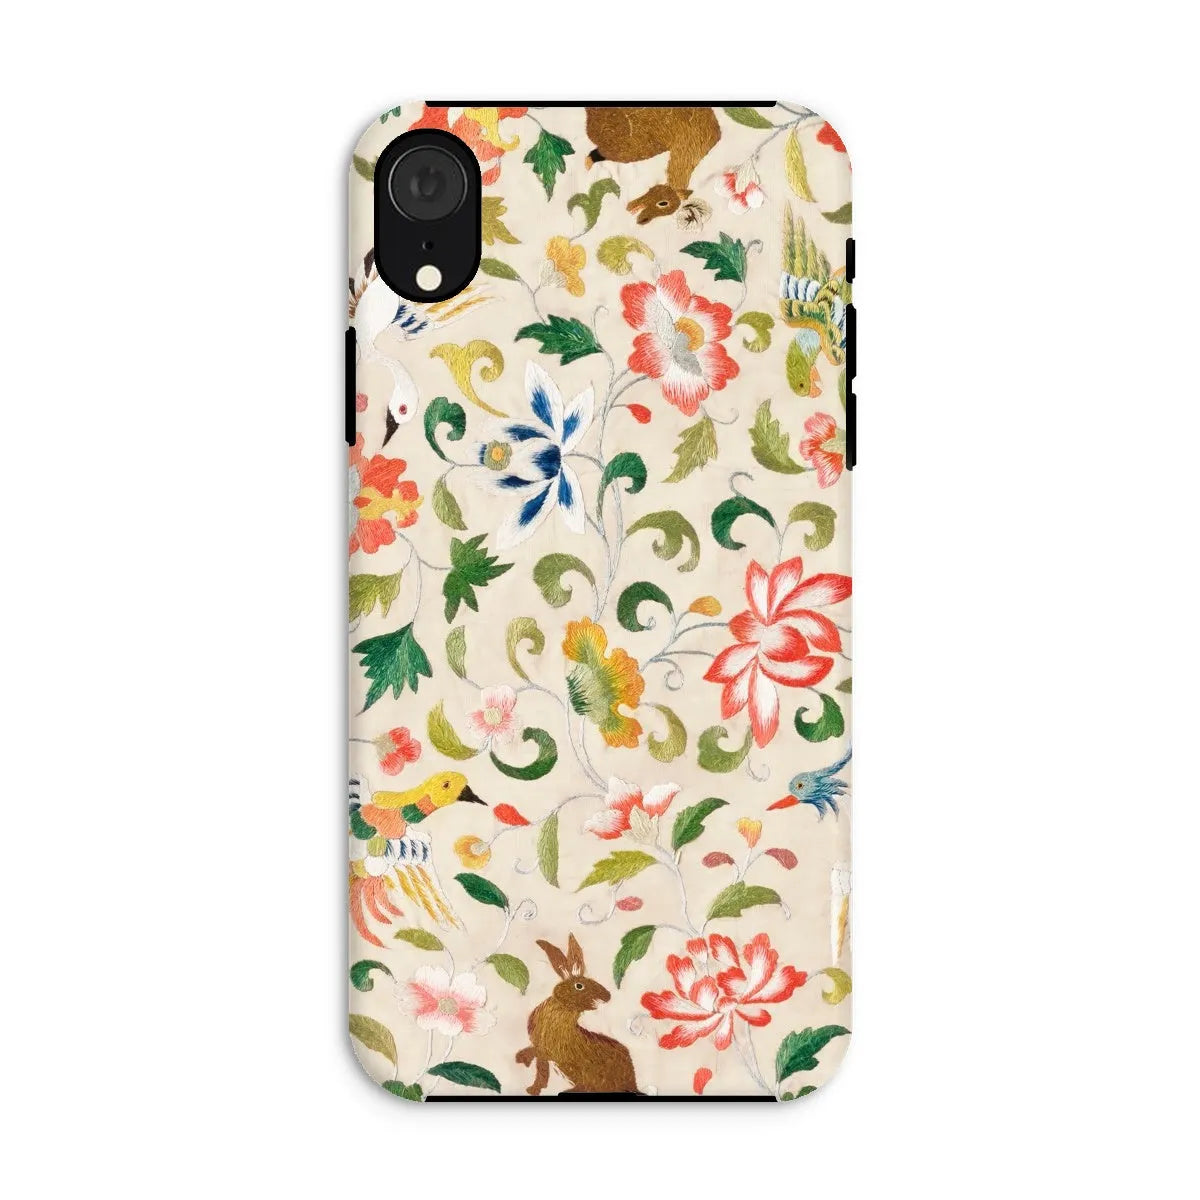 Crittersweet Symphony Tough Phone Case - Iphone Xr / Matte - Mobile Phone Cases - Aesthetic Art